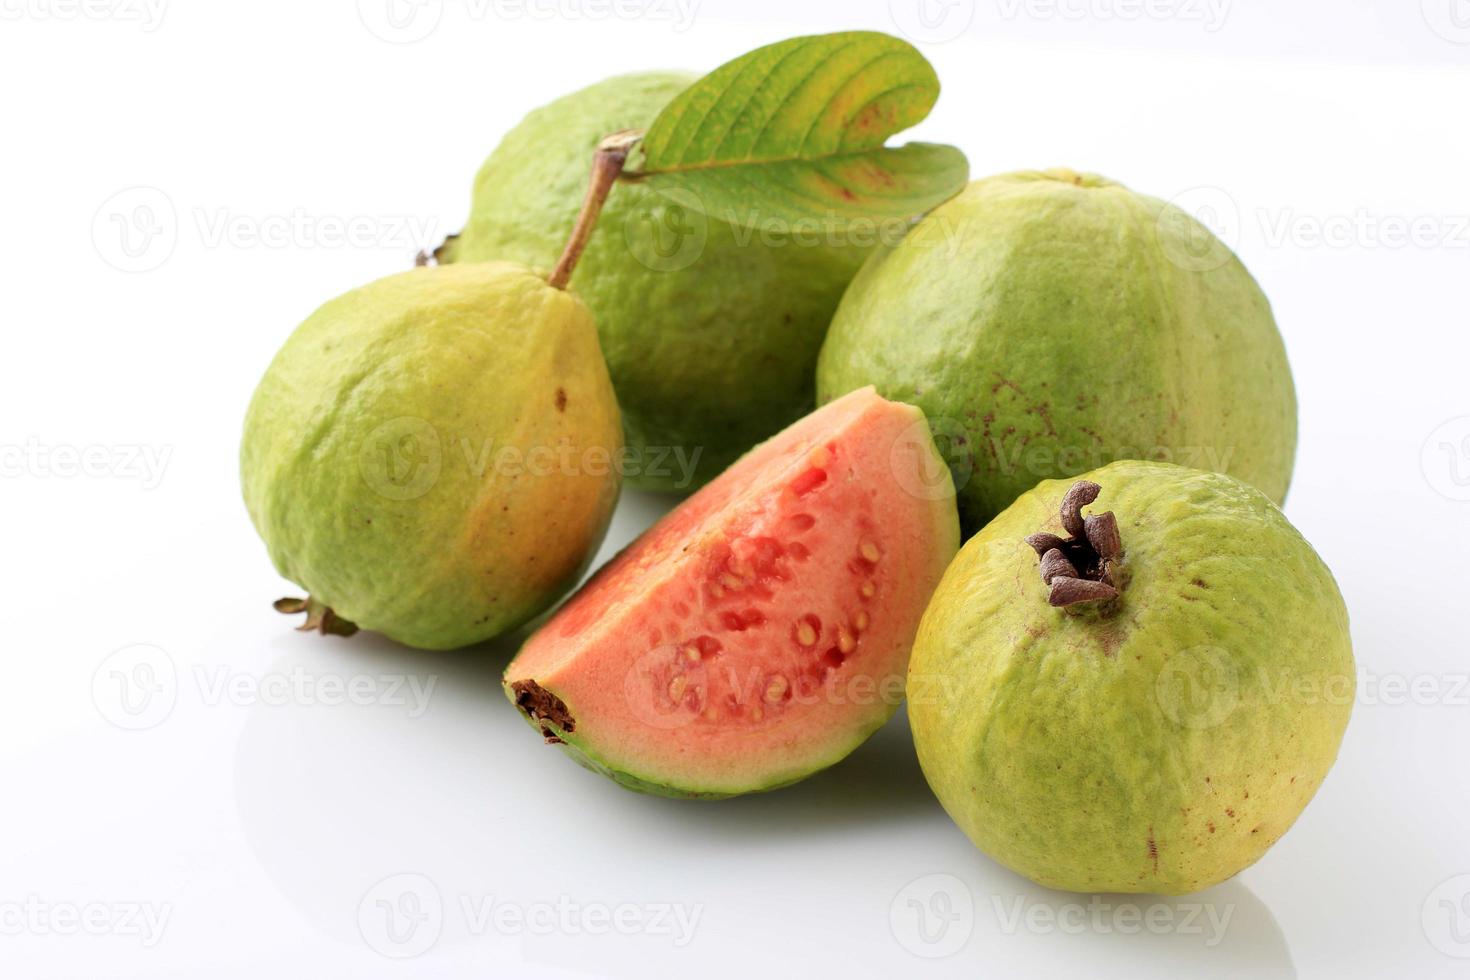 Guava Fruit, Pink, Fresh, Organic, with Leaves, Whole and Sliced, Isolated on White Background. photo